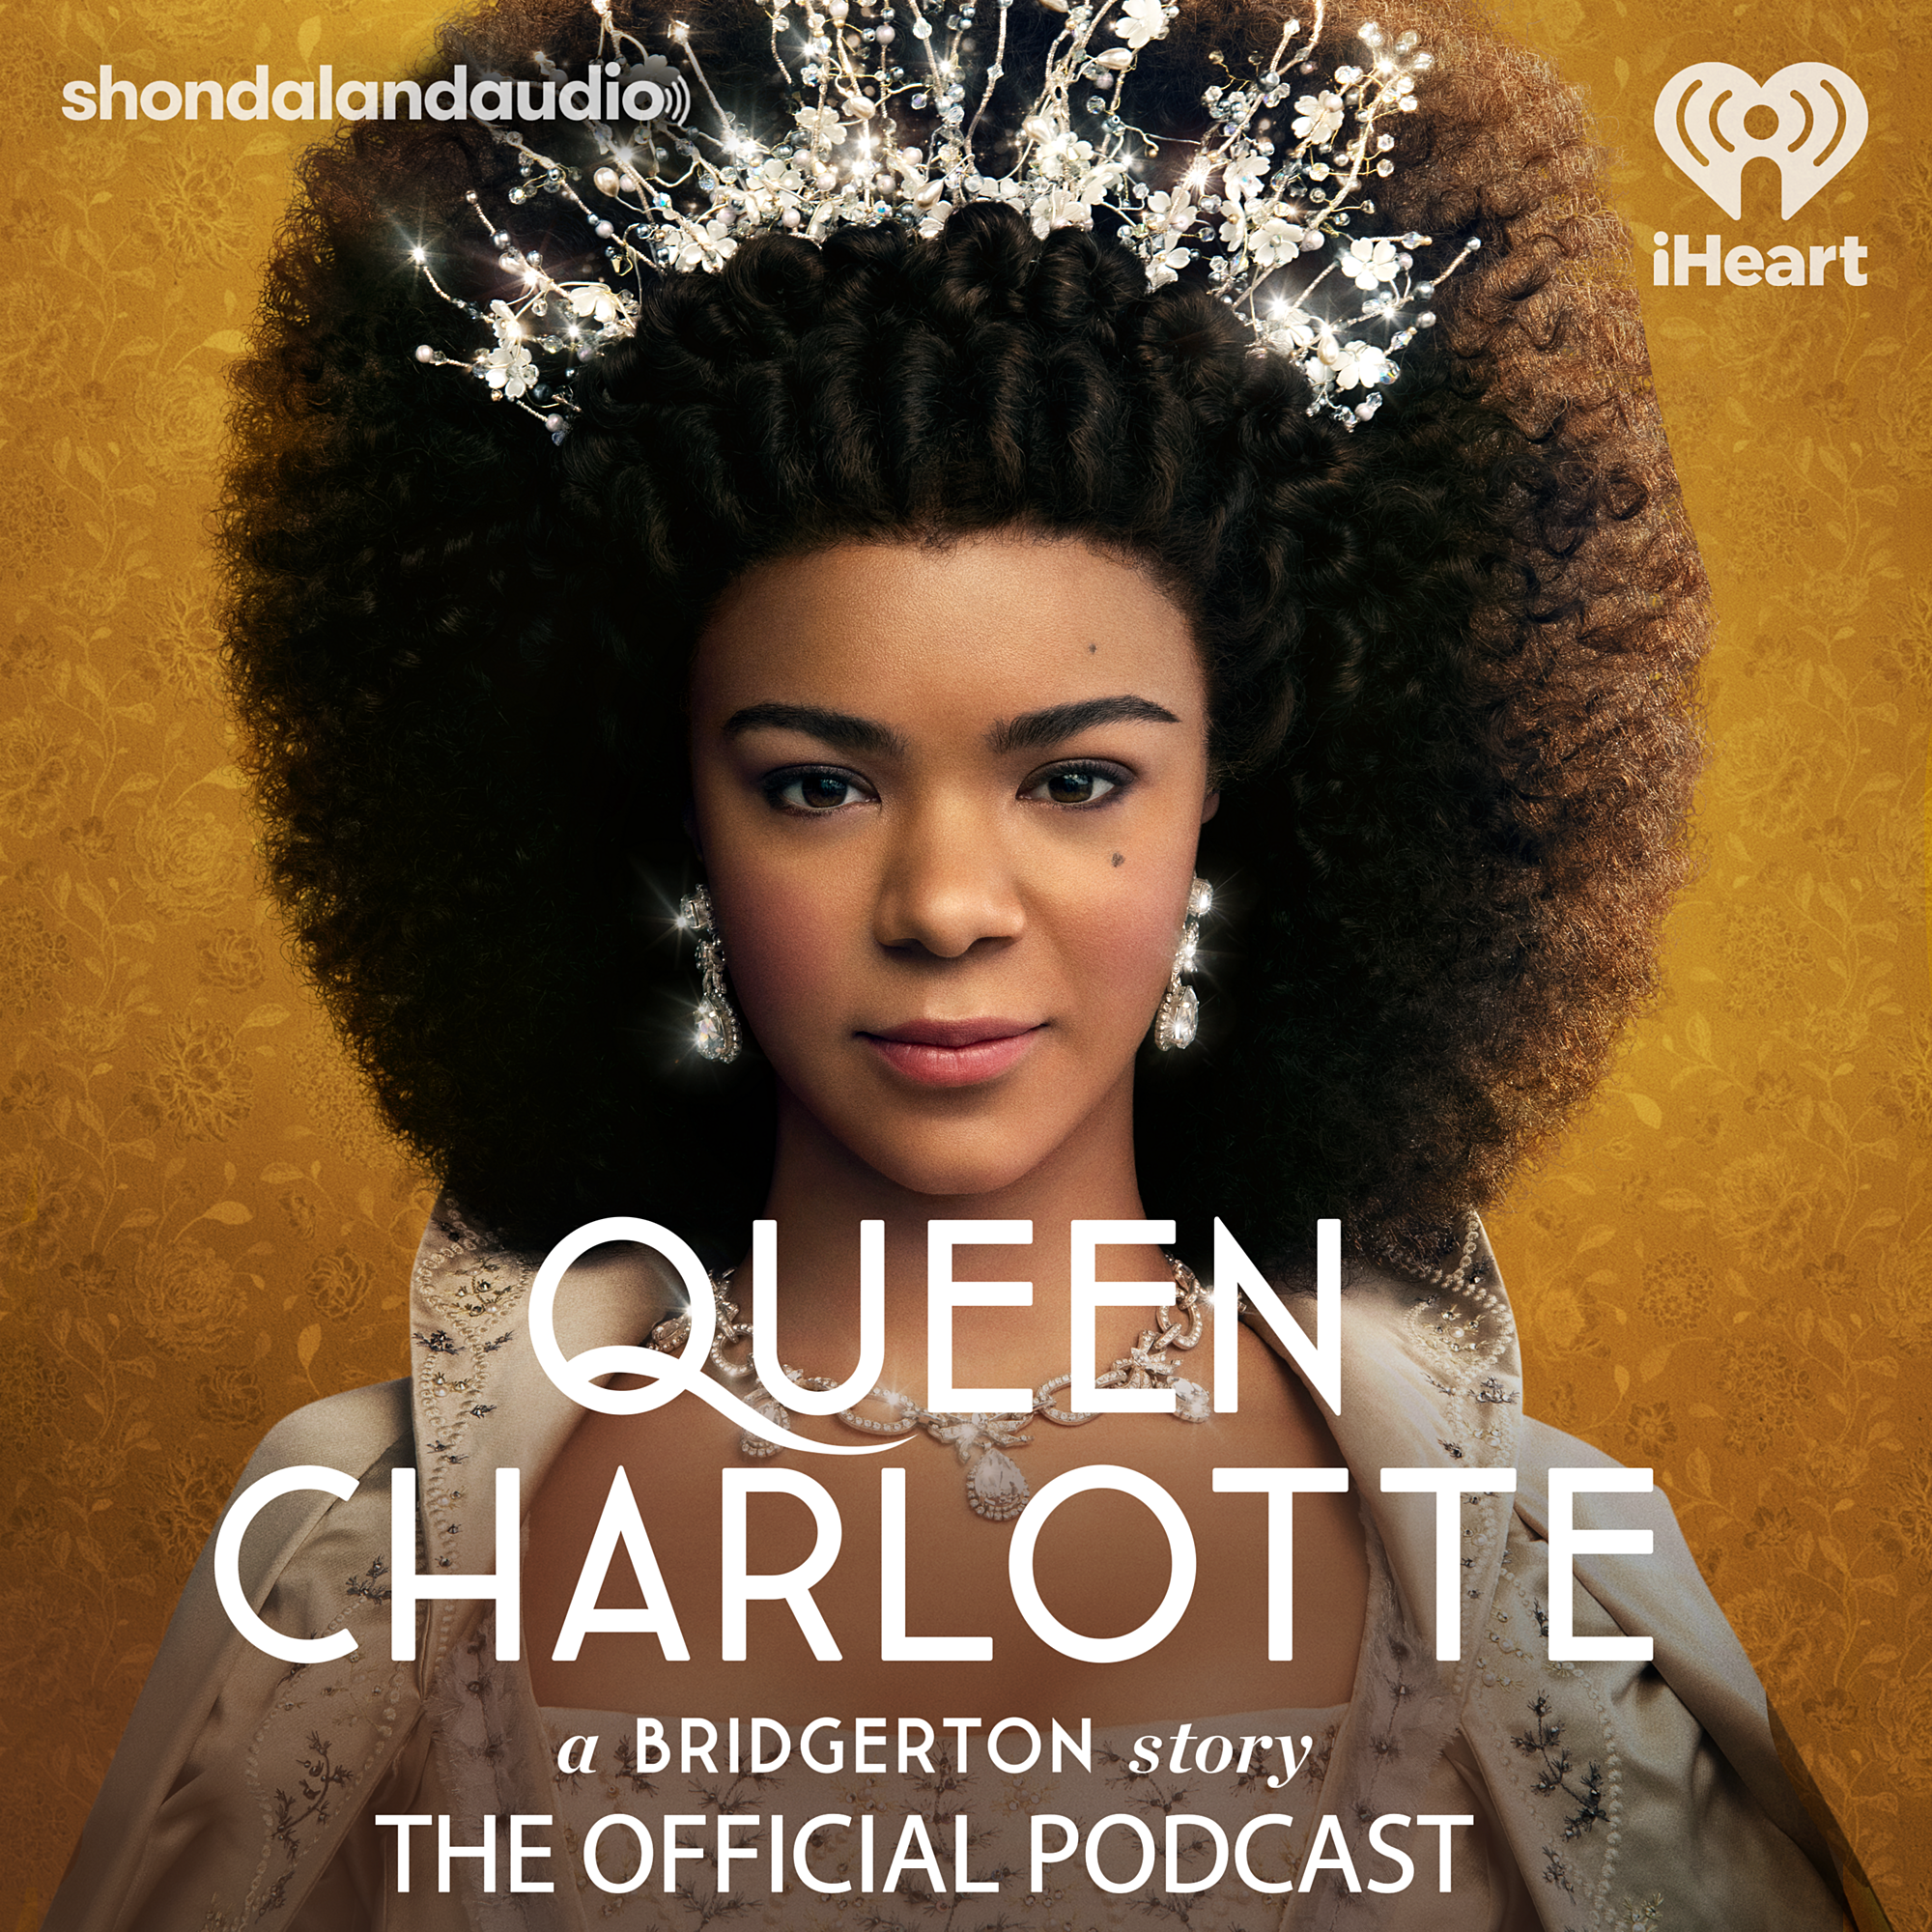  ‘Queen Charlotte’ Gets A Companion Podcast